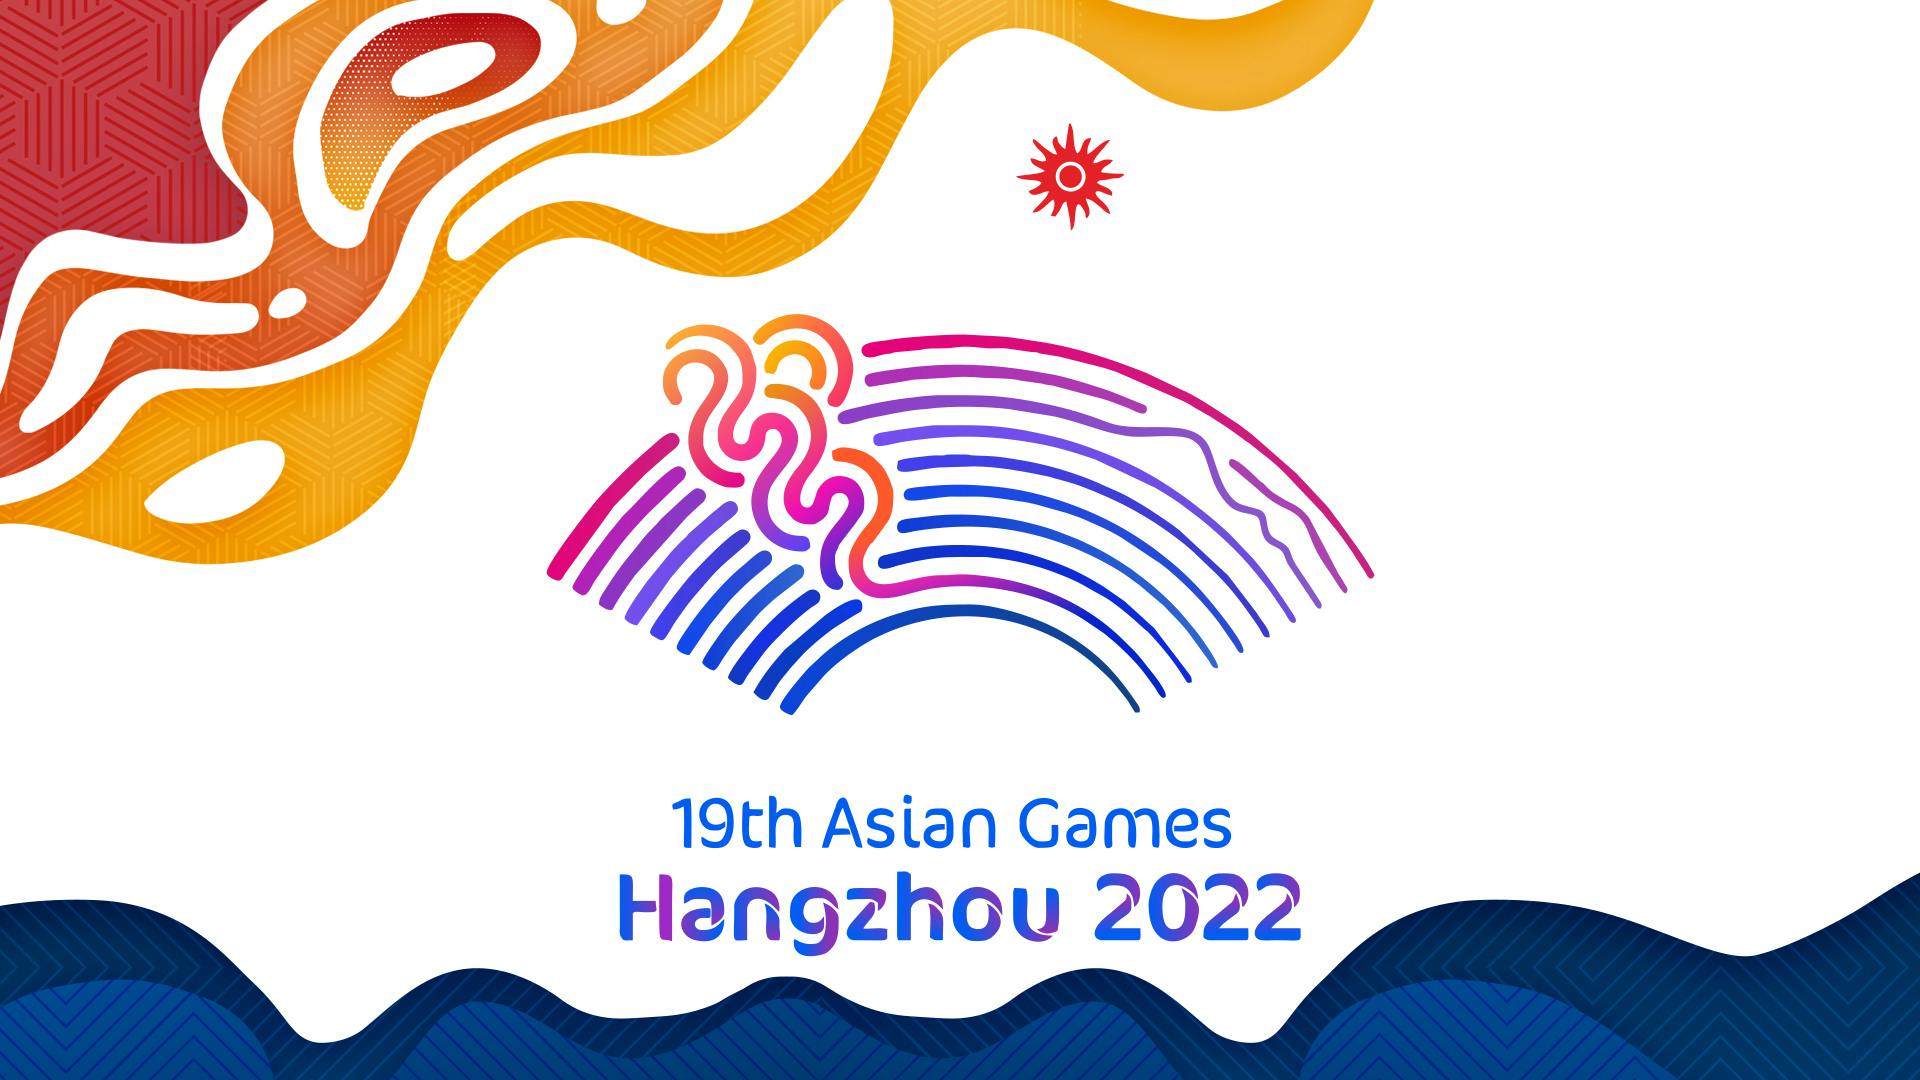 LIVE updates: Asian Games medal tally, team news, scores, and more